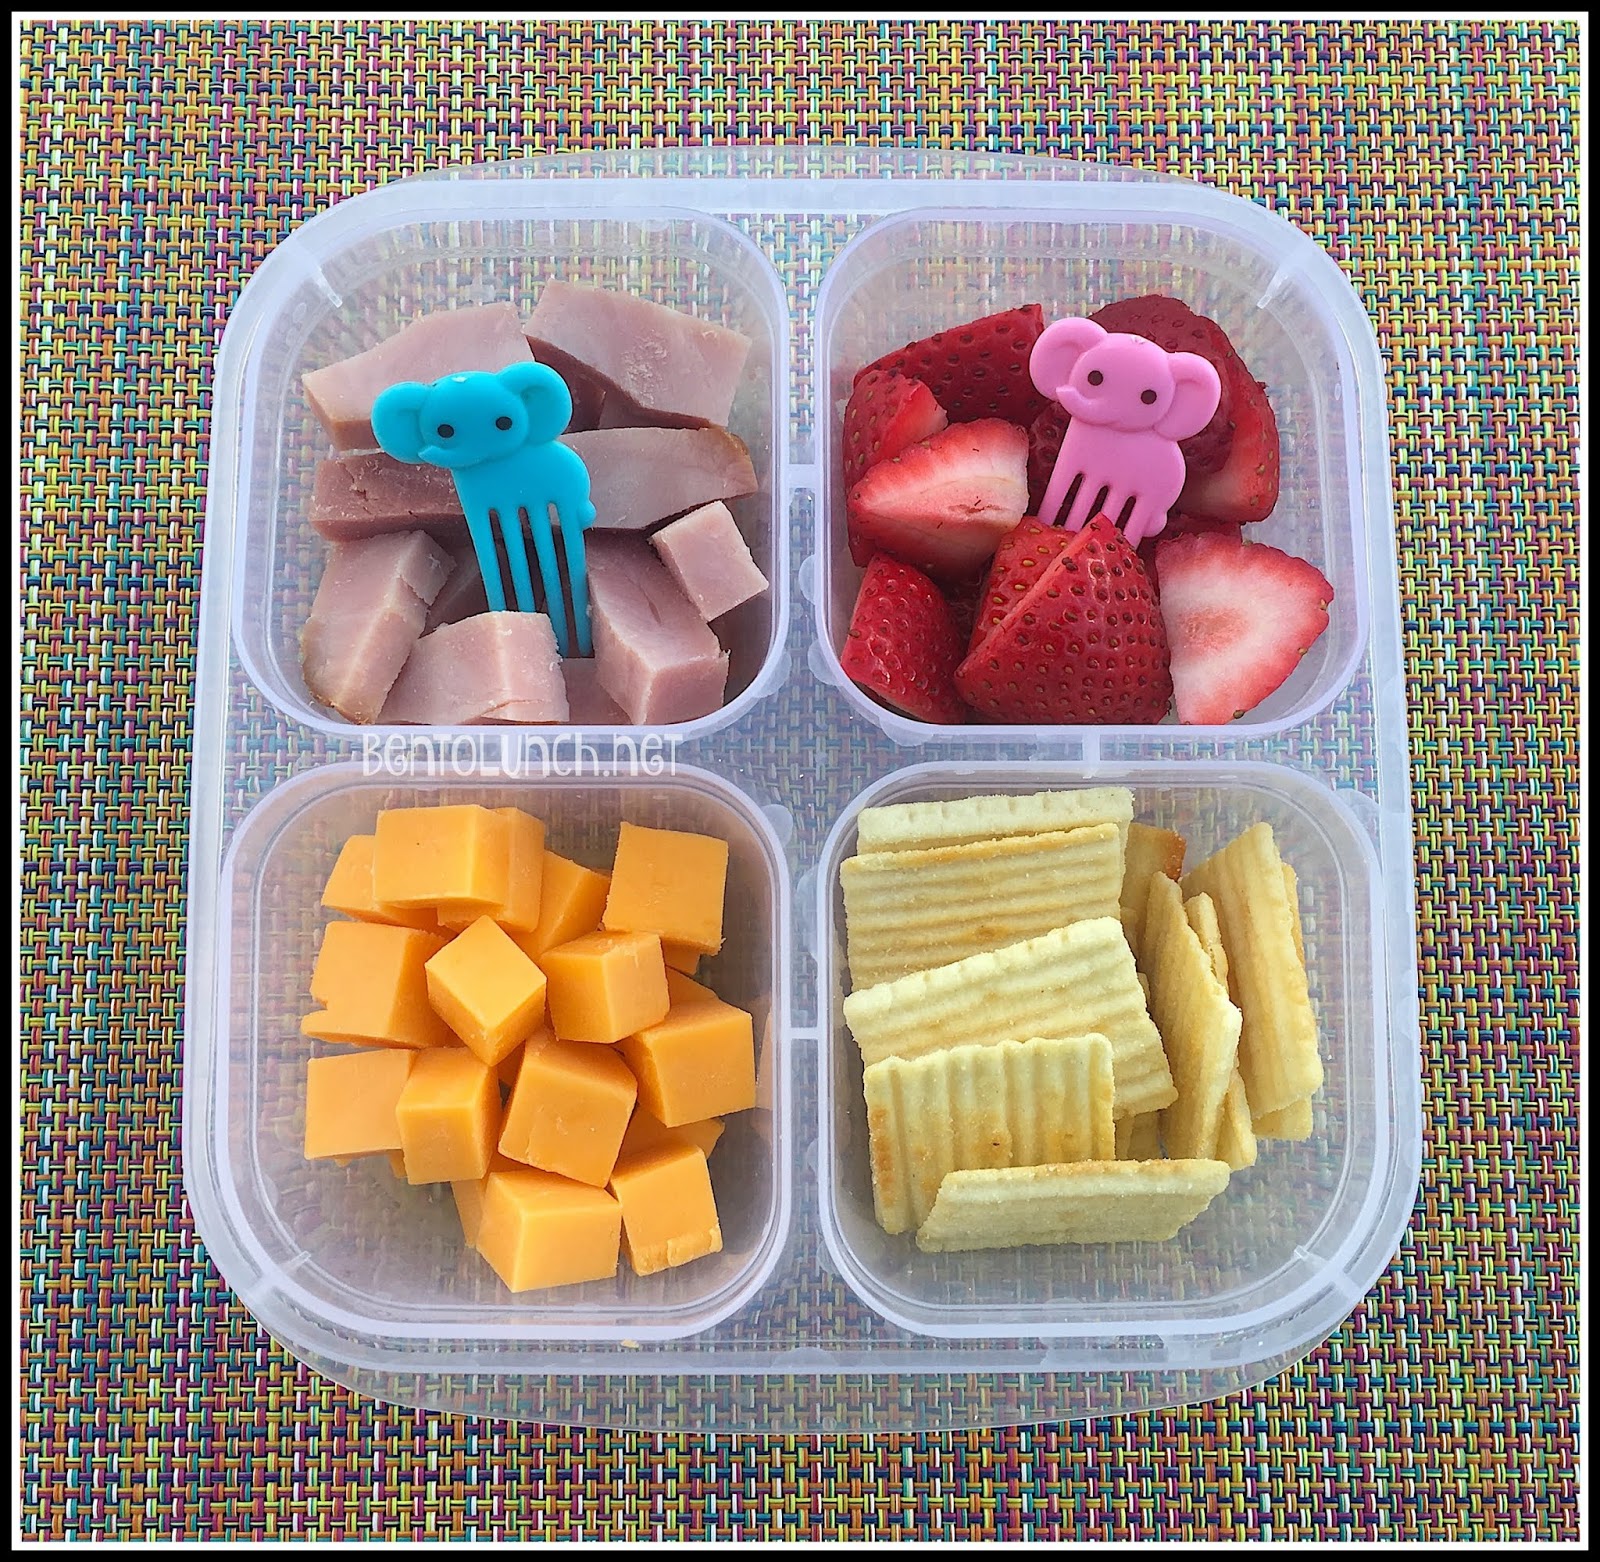 Pack a Simple Snack Box